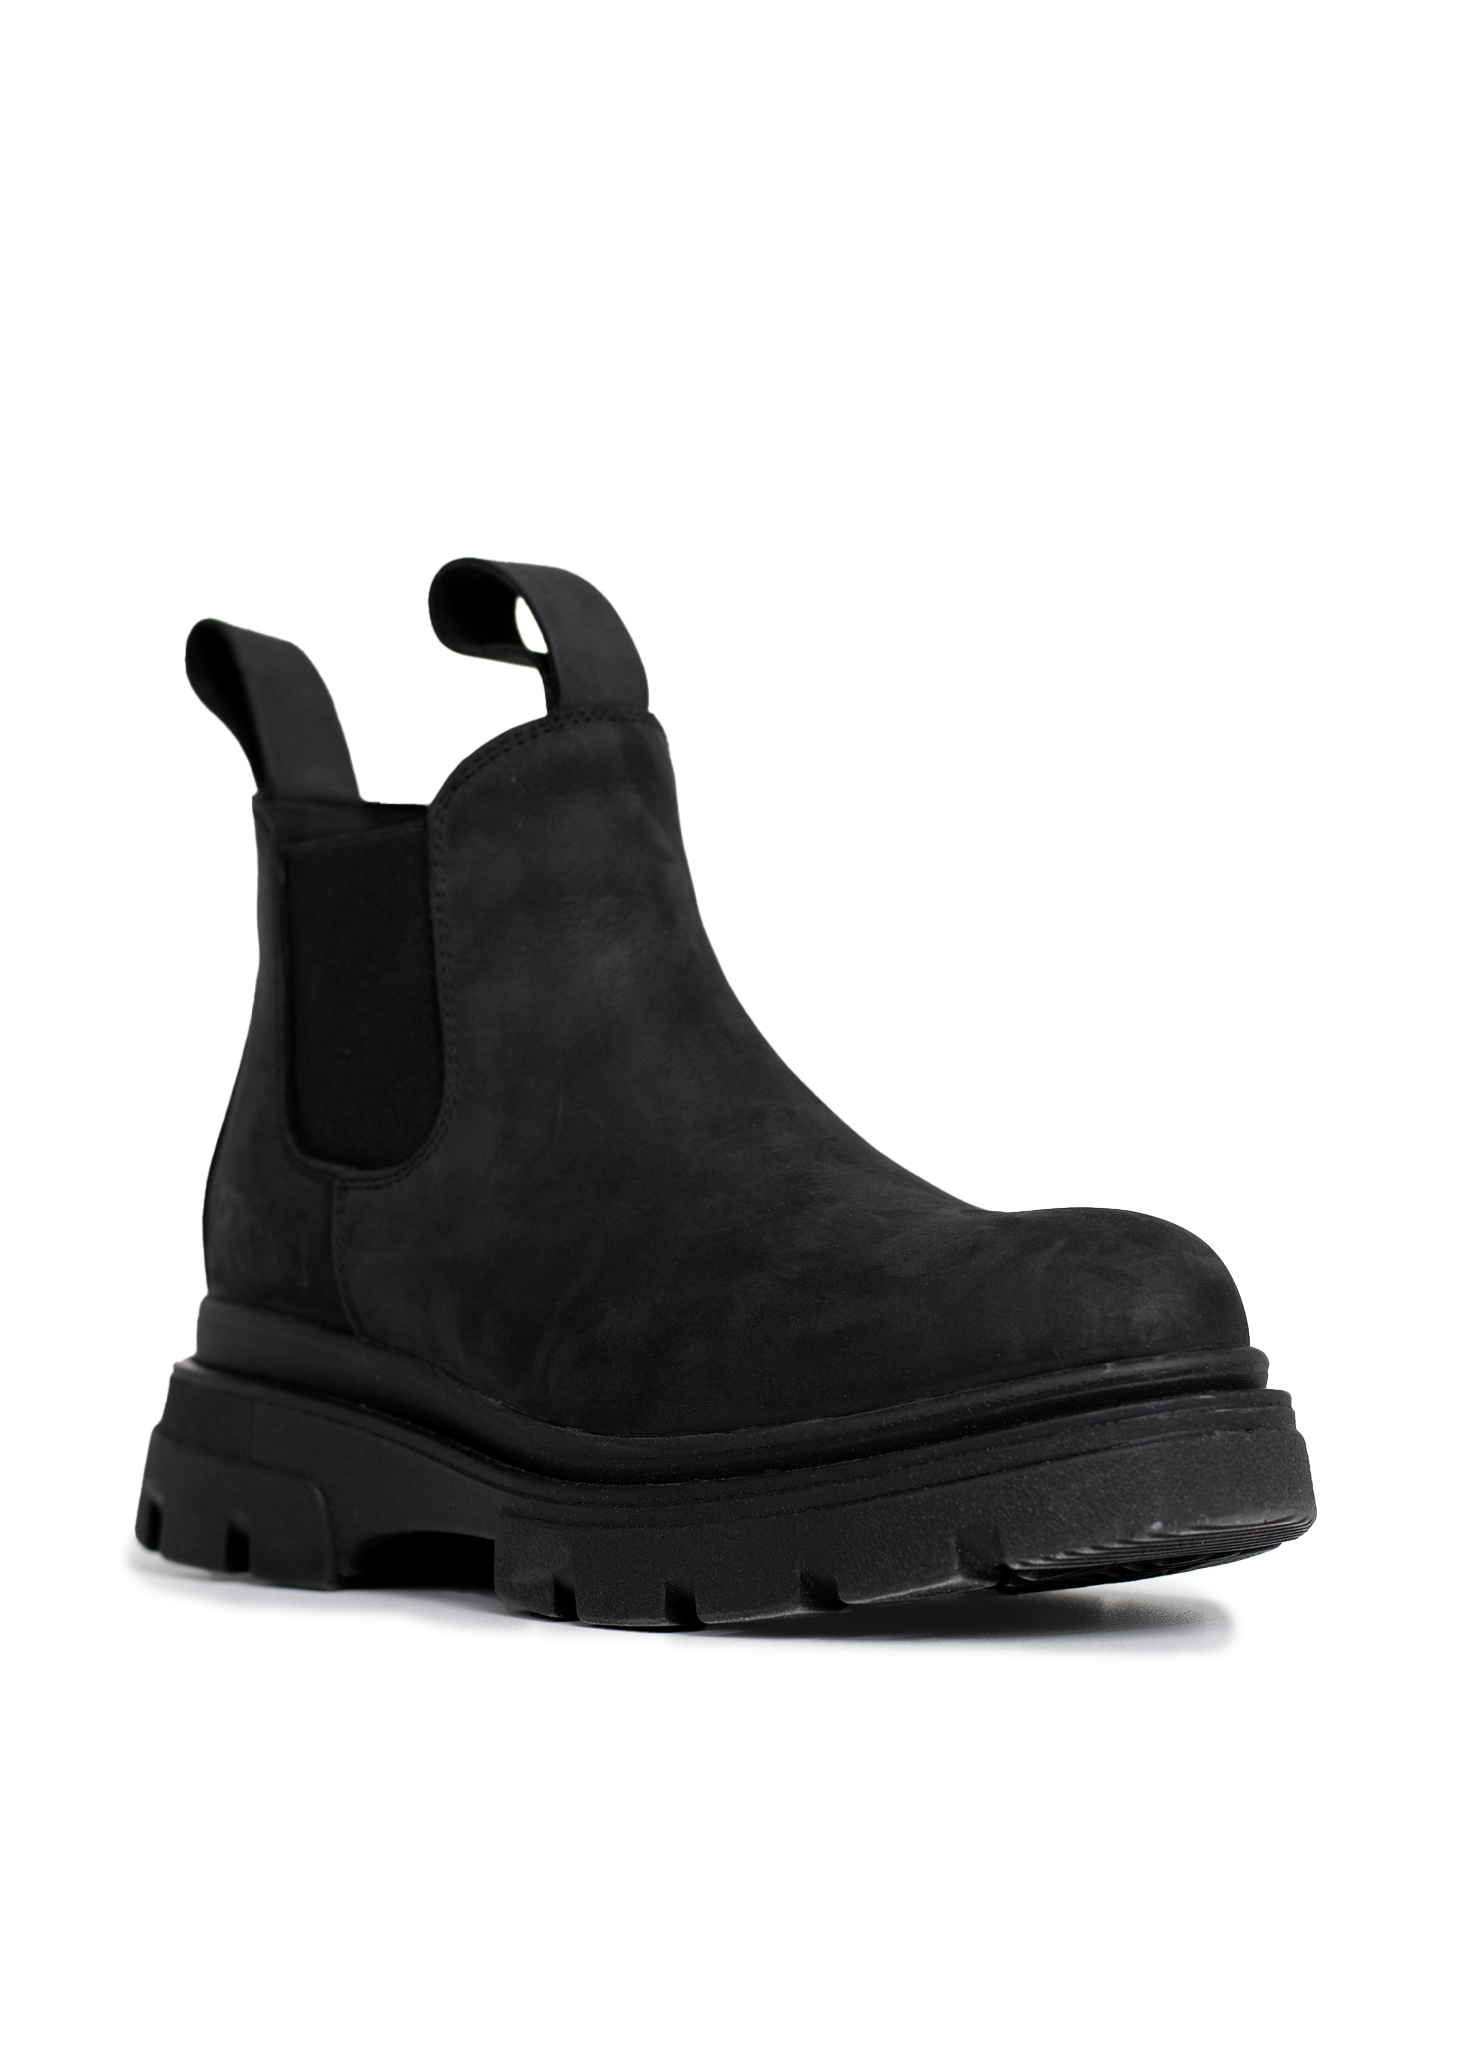 BRGN Low Chelsea Boot Shoes 095 New Black